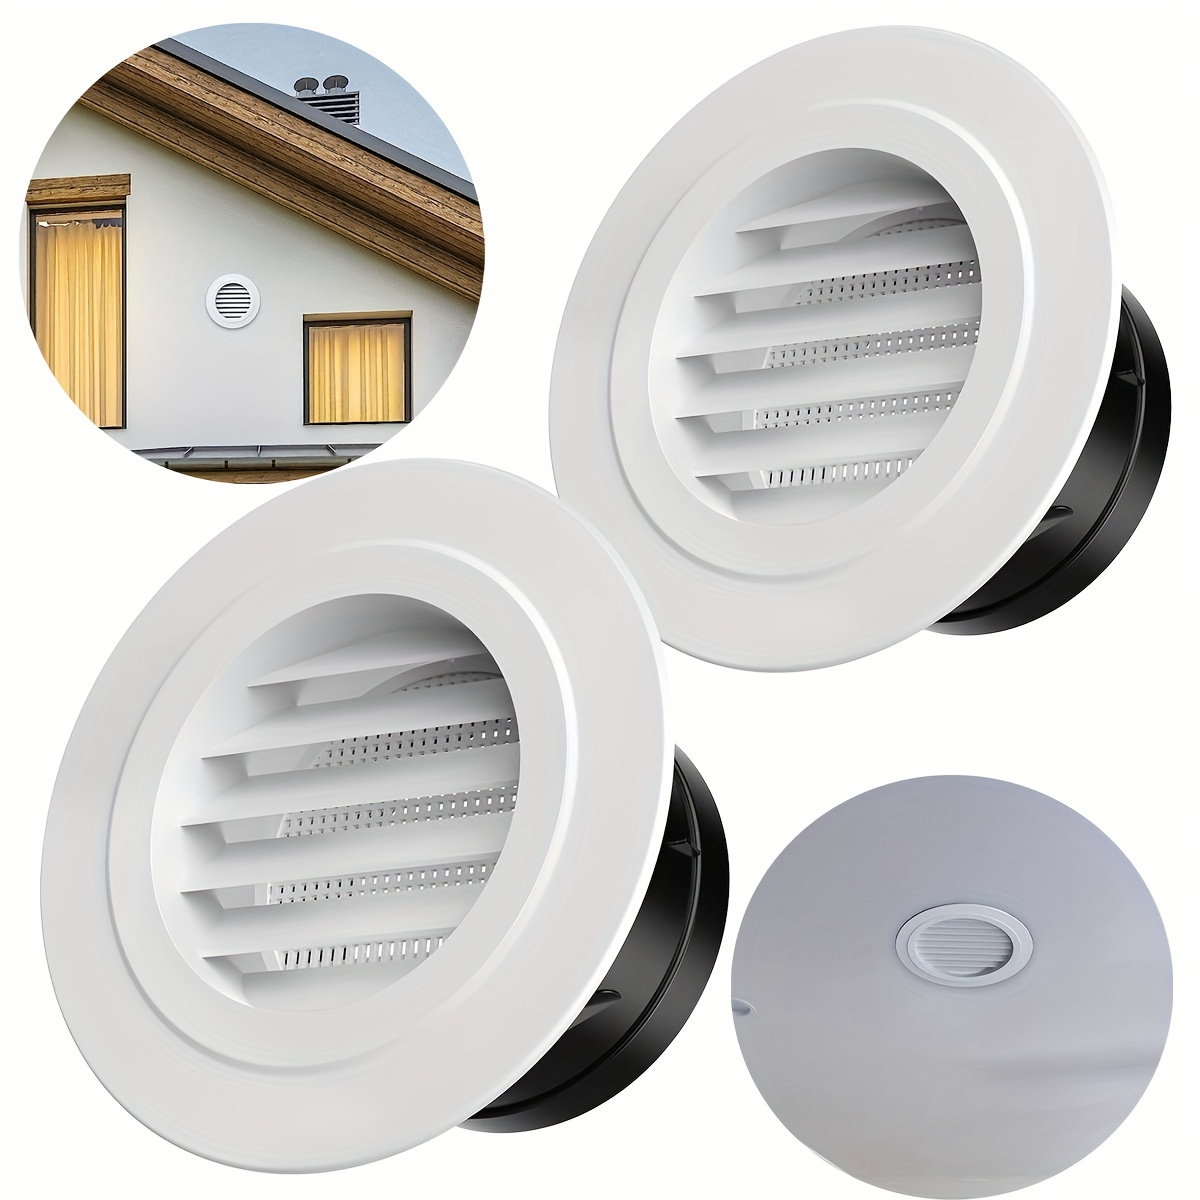 

2pcs Soffit Vents, Soffit Exhaust Vent Exterior Round Vent Covers, With Built-in A Fly Screen For Bathroom Office Home